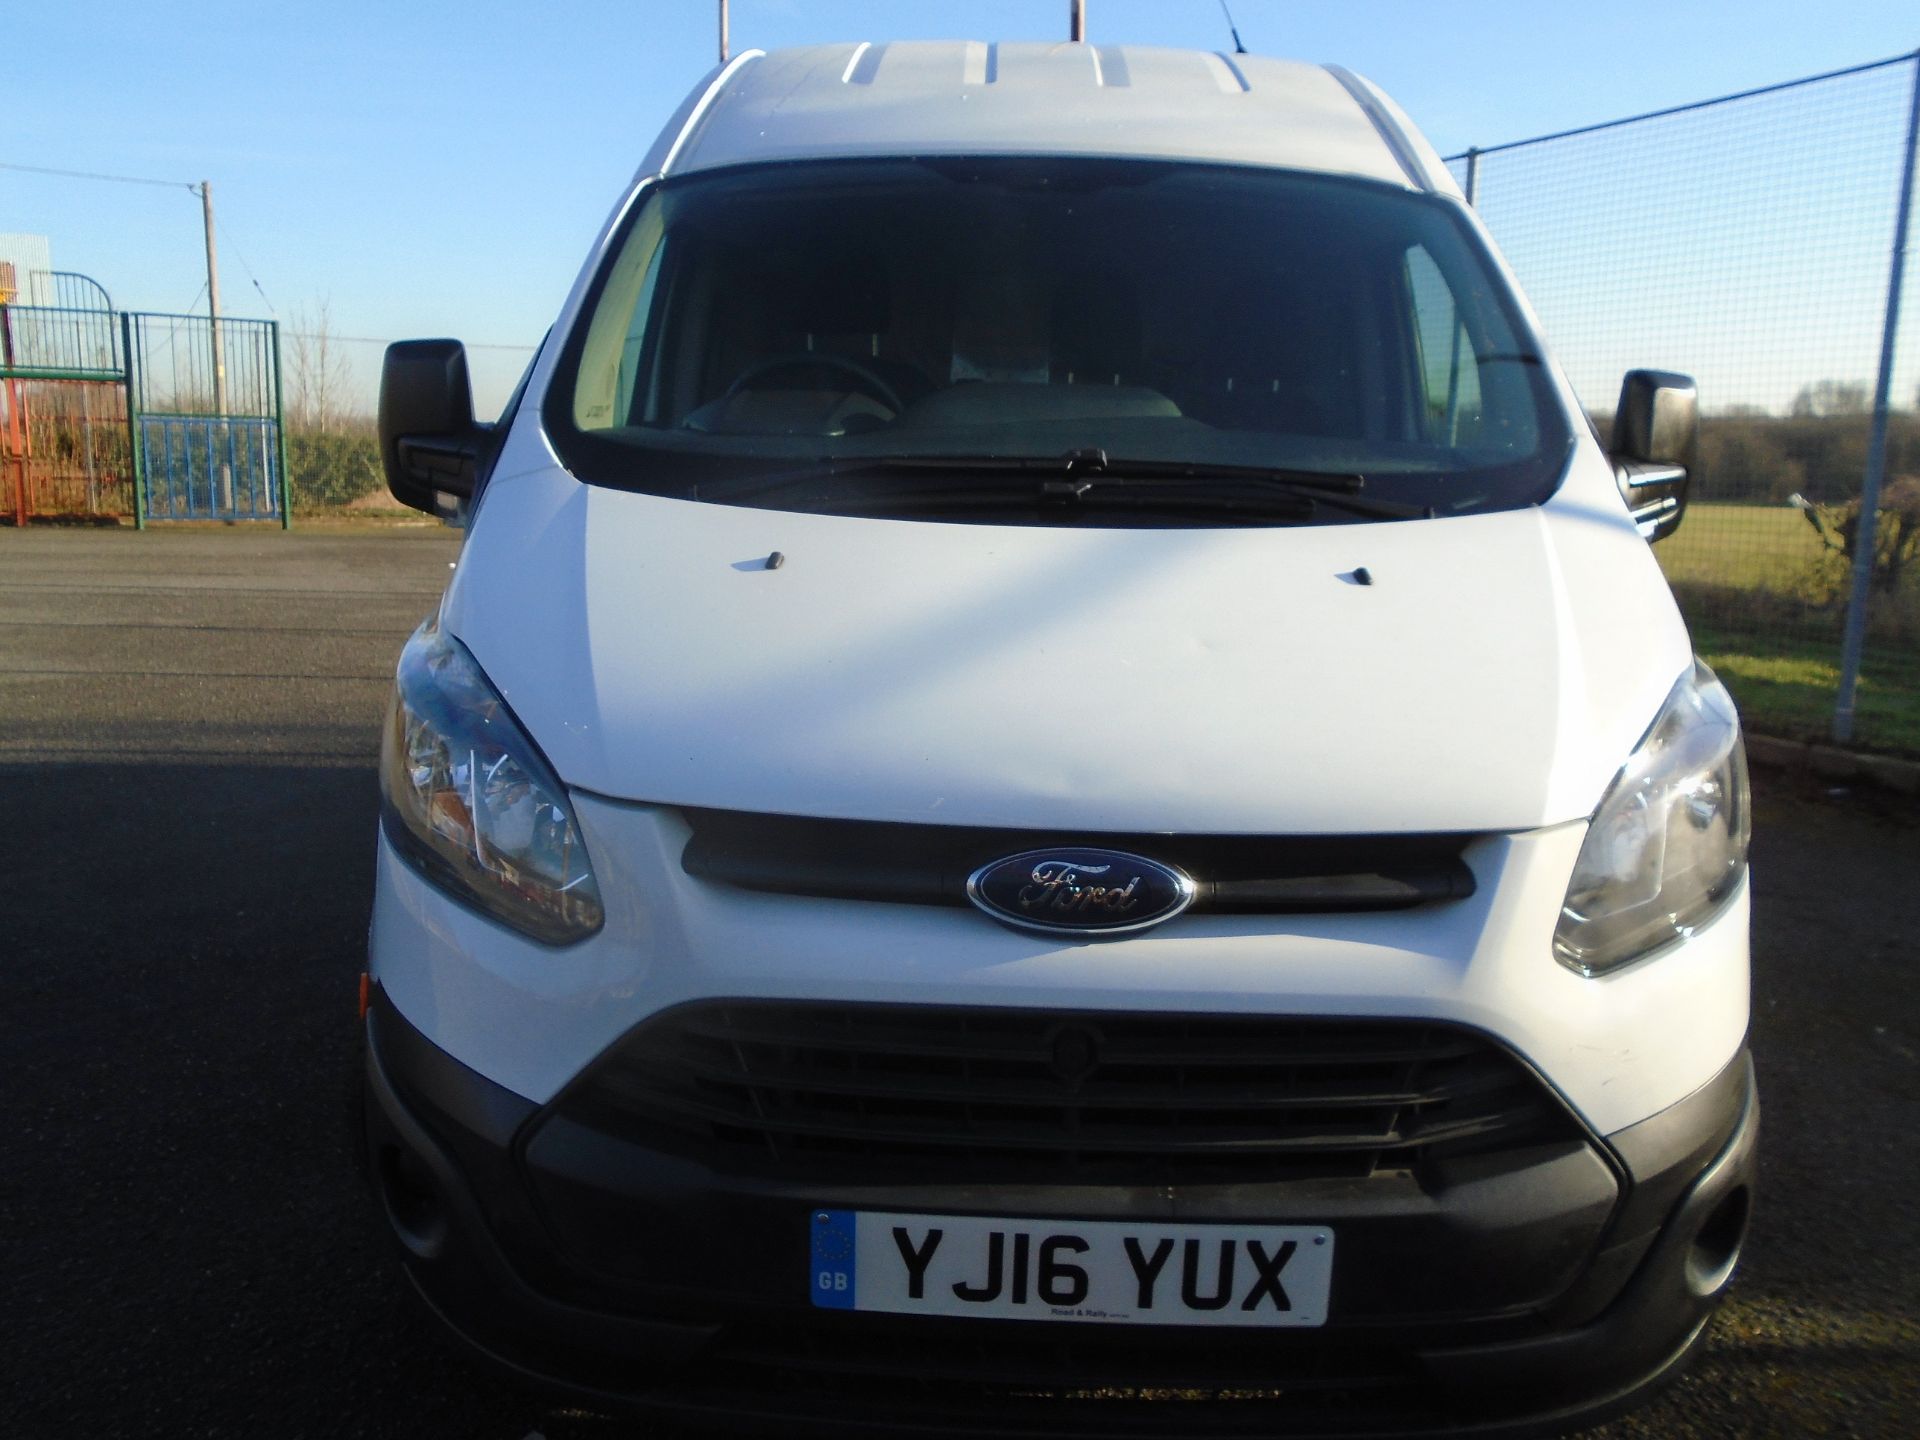 2016/16 REG FORD TRANSIT CUSTOM 270 ECO-TECH 2.2TDCI (125PS) HIGH ROOF L1H2 IDEAL FOR CHILLING - Image 4 of 9